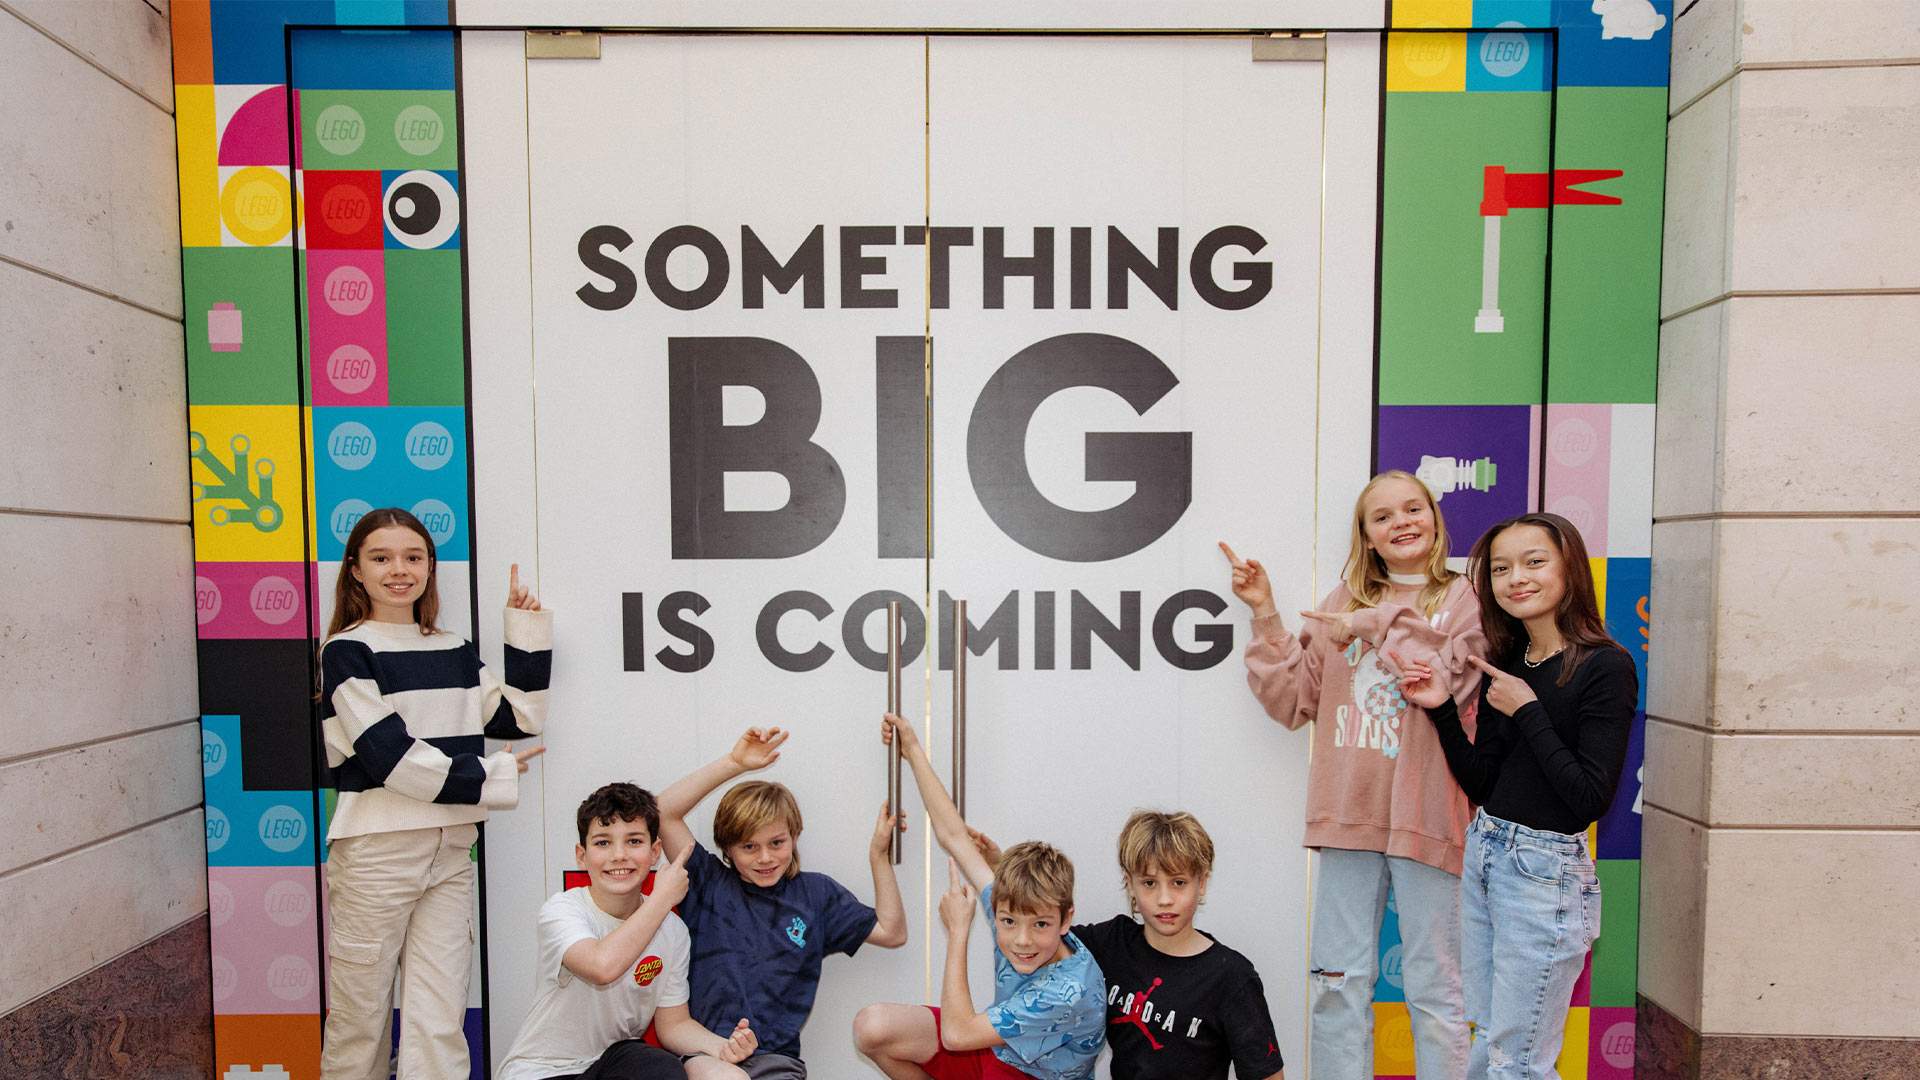 A group of seven kids standing outside Sydney's lego store in front of a sign that says 